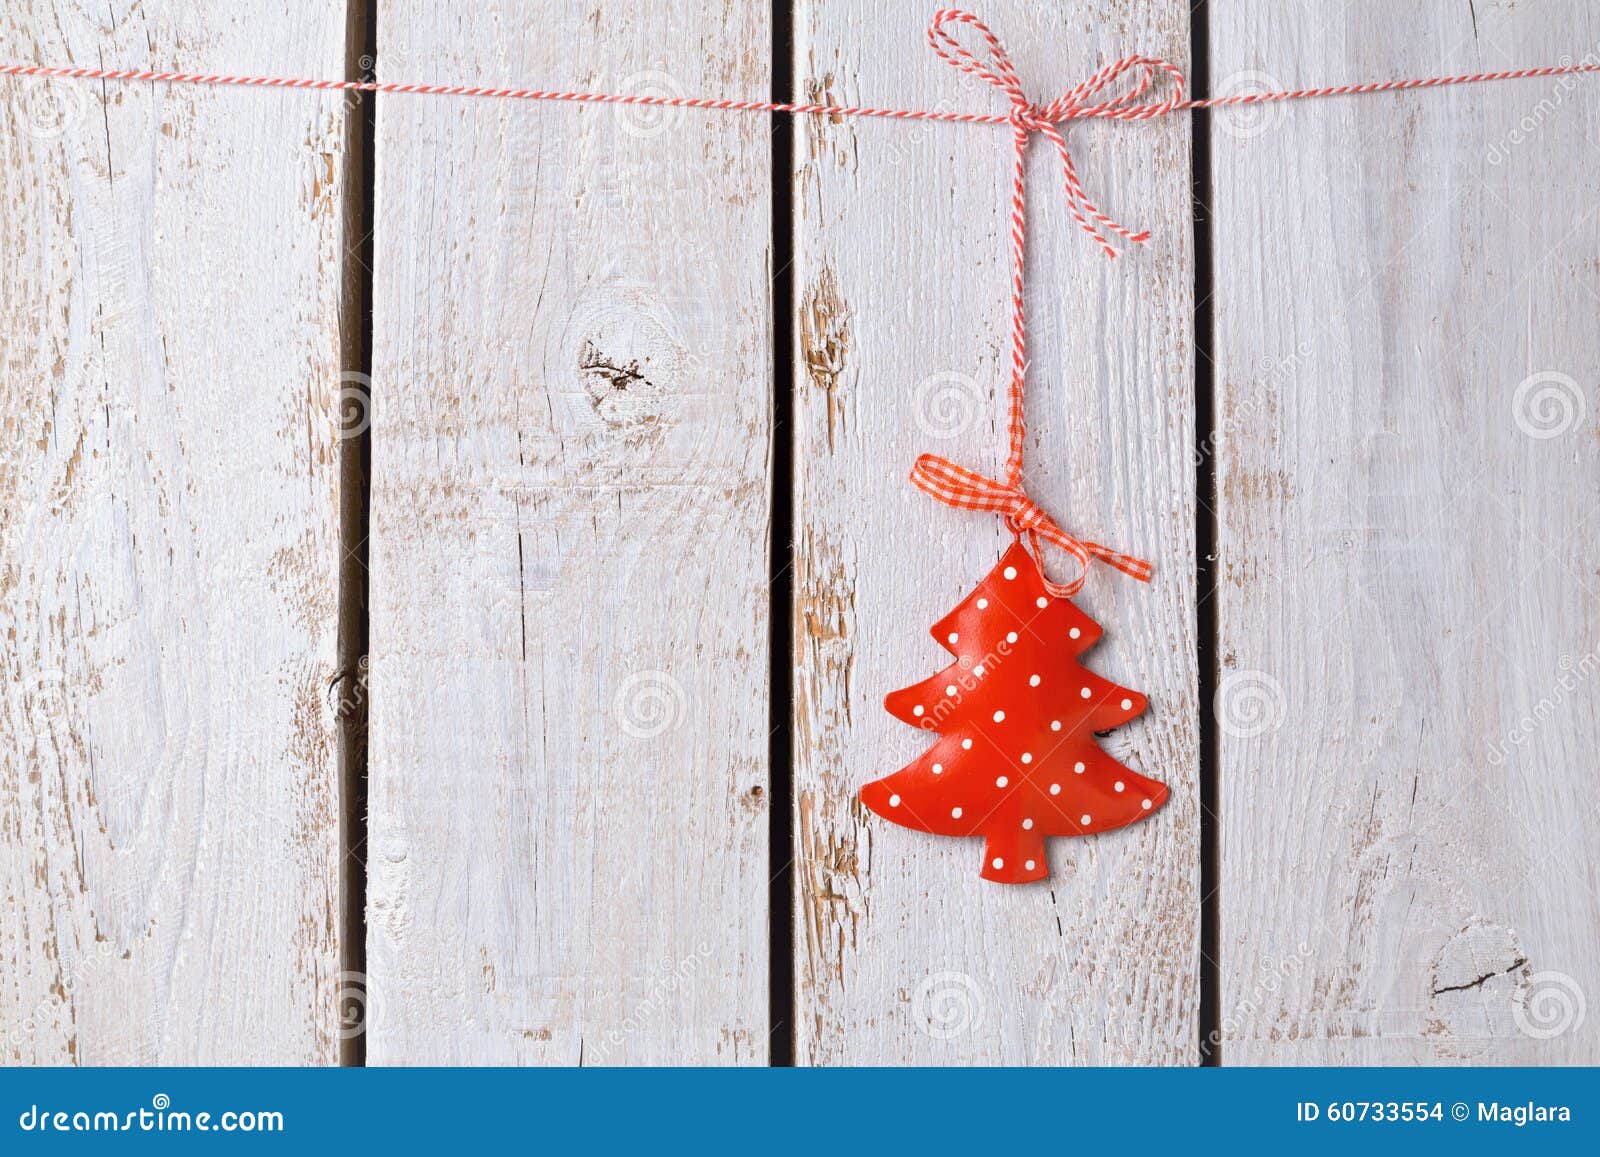 Christmas Tree Ornament Hanging Over White Wooden Background Stock ...